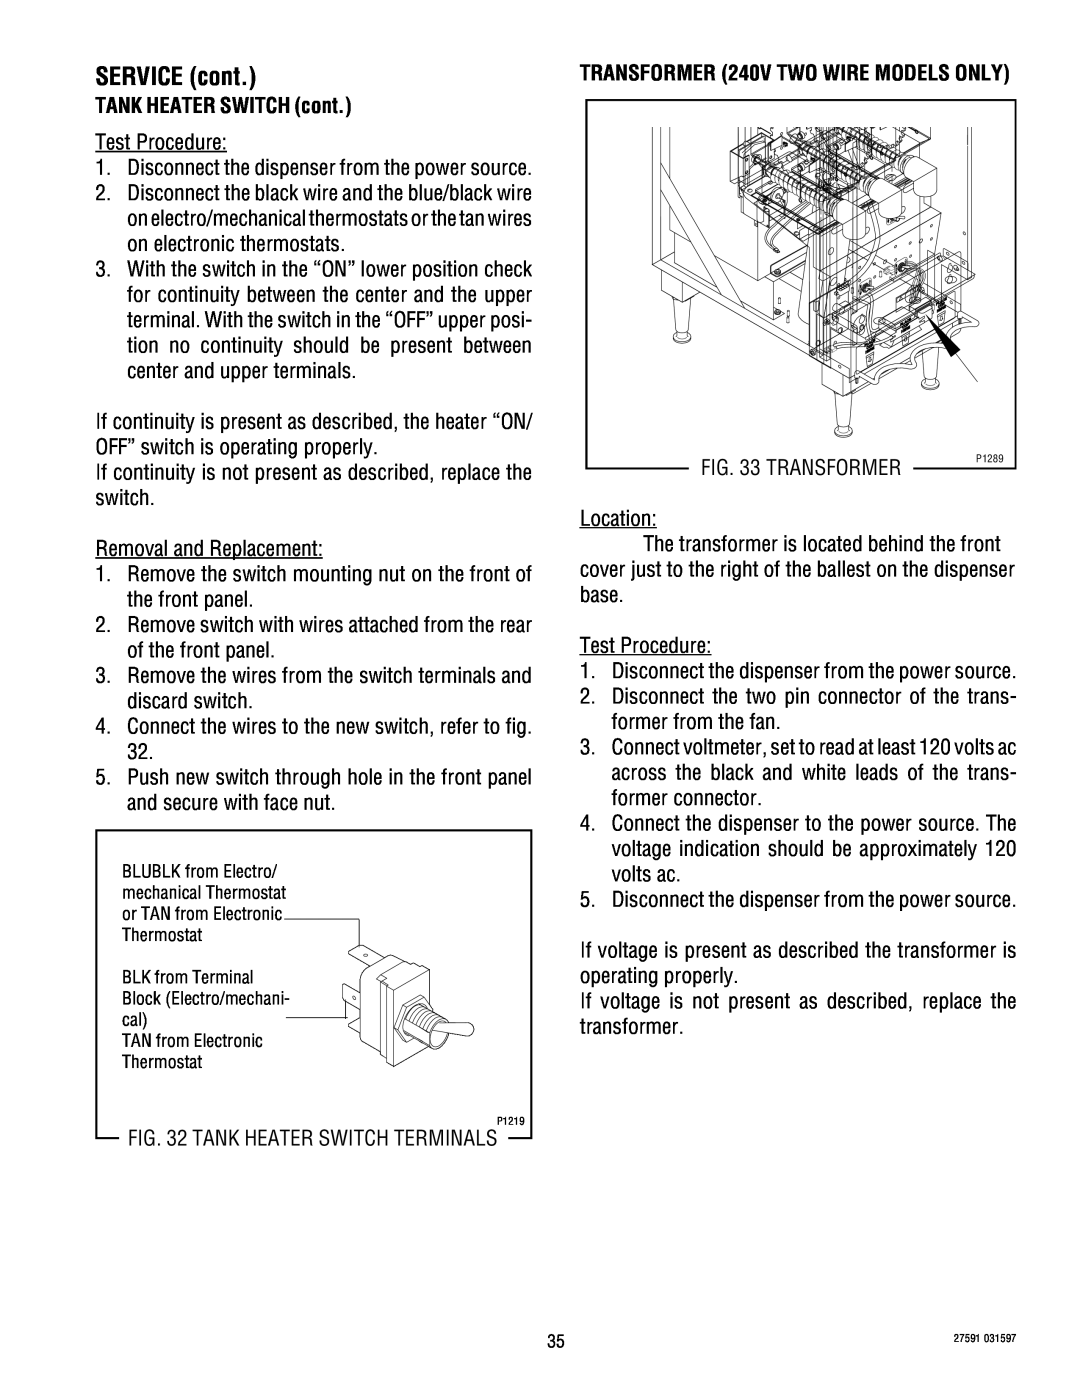 Bunn HC-2 HC-3 service manual TANK HEATER SWITCH cont, SERVICE cont, TRANSFORMER 240V TWO WIRE MODELS ONLY 